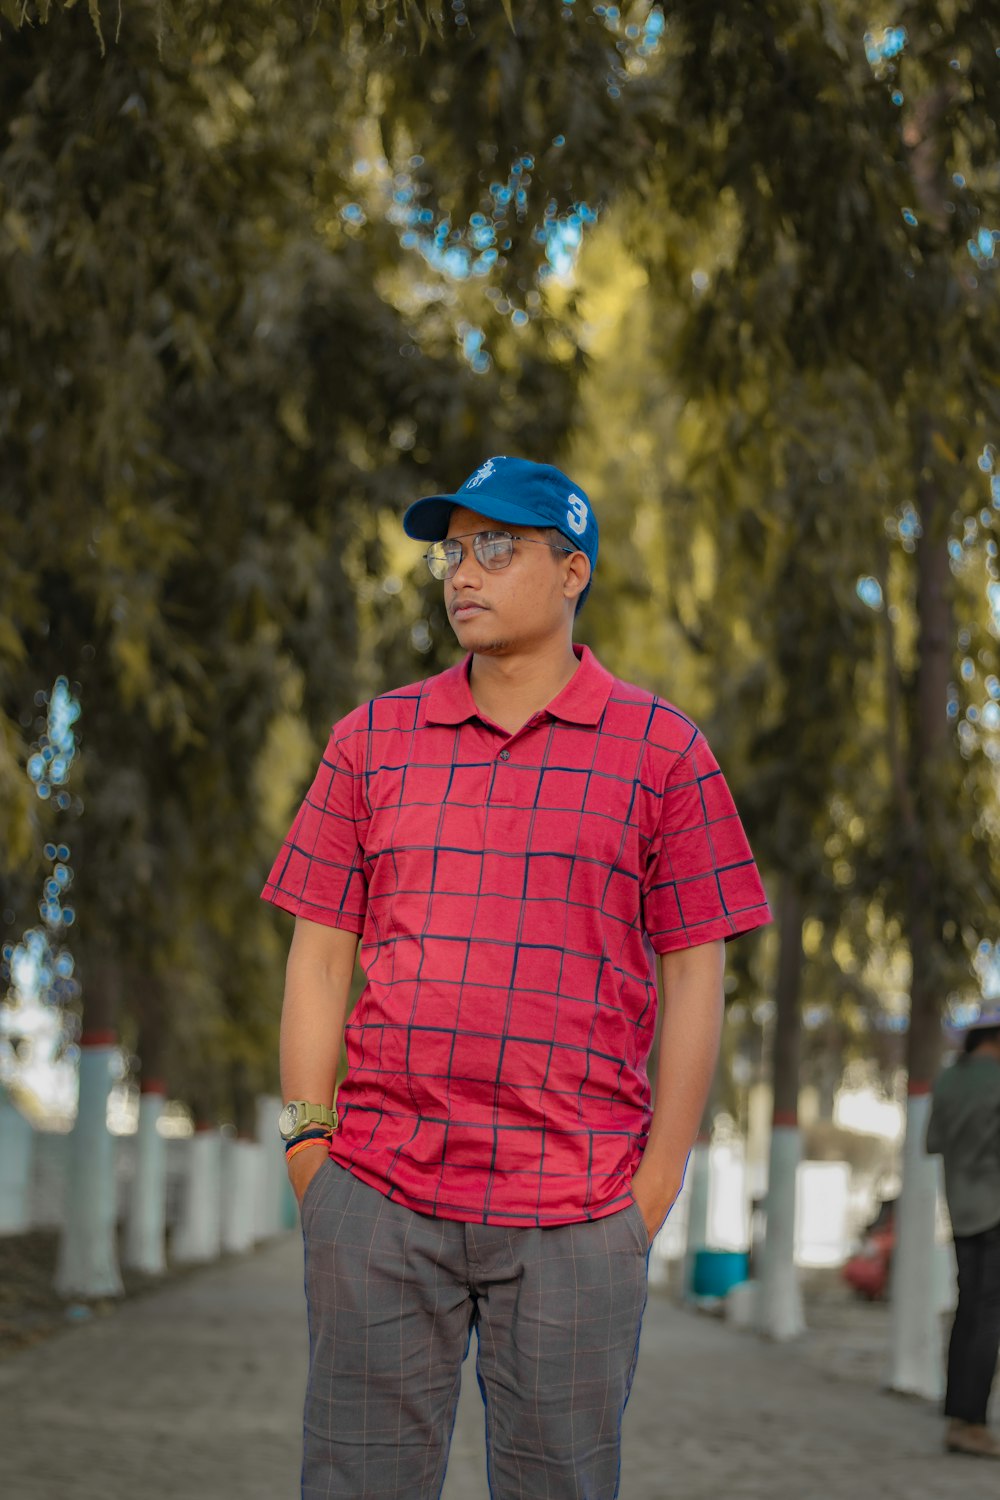 A man in a red shirt and a blue hat photo – Free Sleeve Image on Unsplash